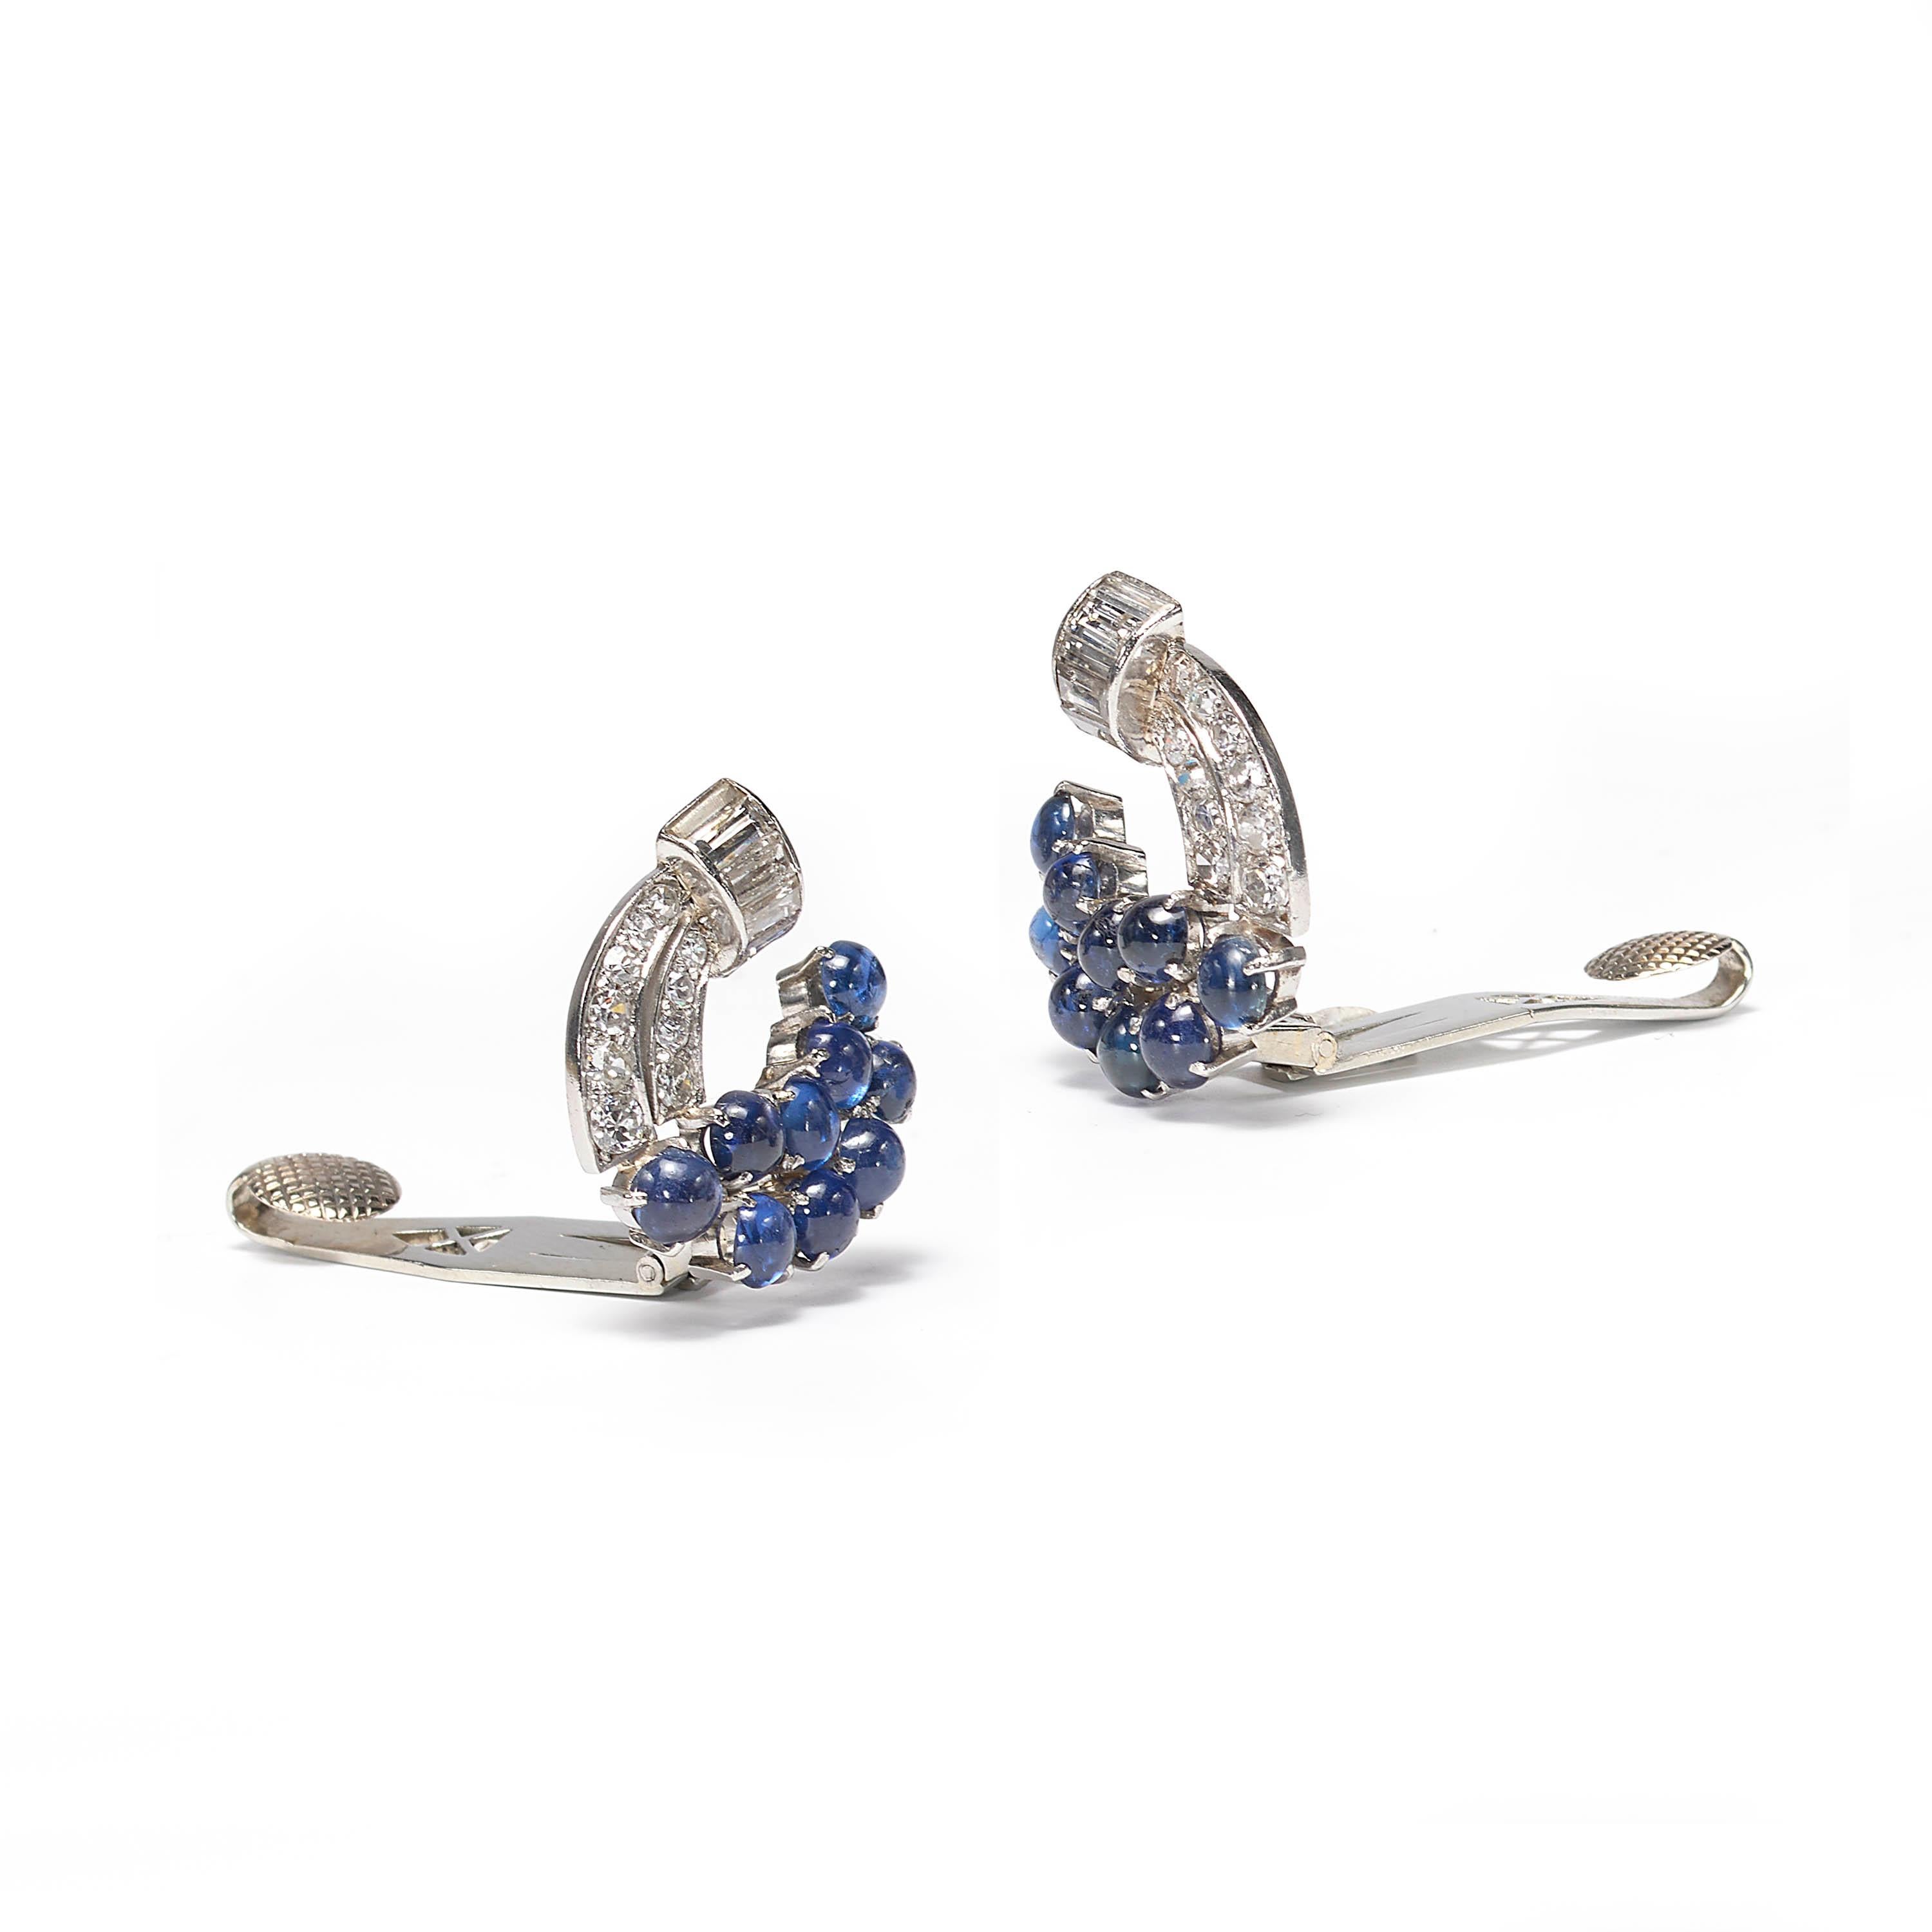 A pair of vintage sapphire and diamond ear clips, comprised of cabochon-cut sapphires weighing an estimated total of 5.00ct, and single-cut and baguette-cut diamonds, weighing an estimated total of 1.80ct, in a scroll design, mounted in platinum.